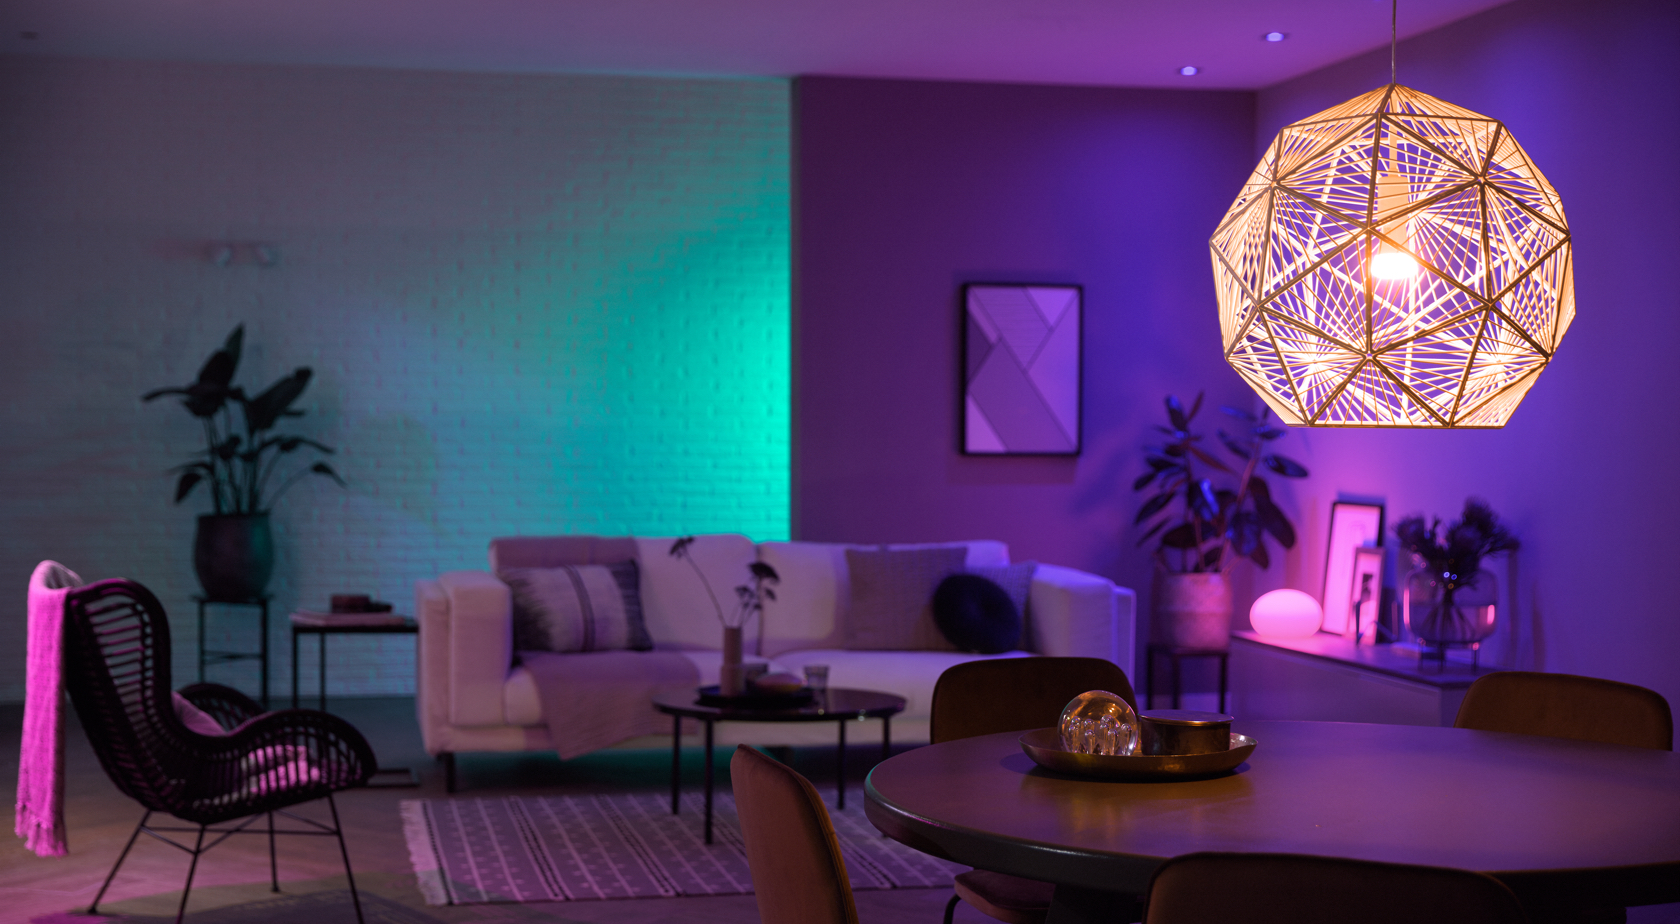 Living space with shades of green, pink and purple lighting